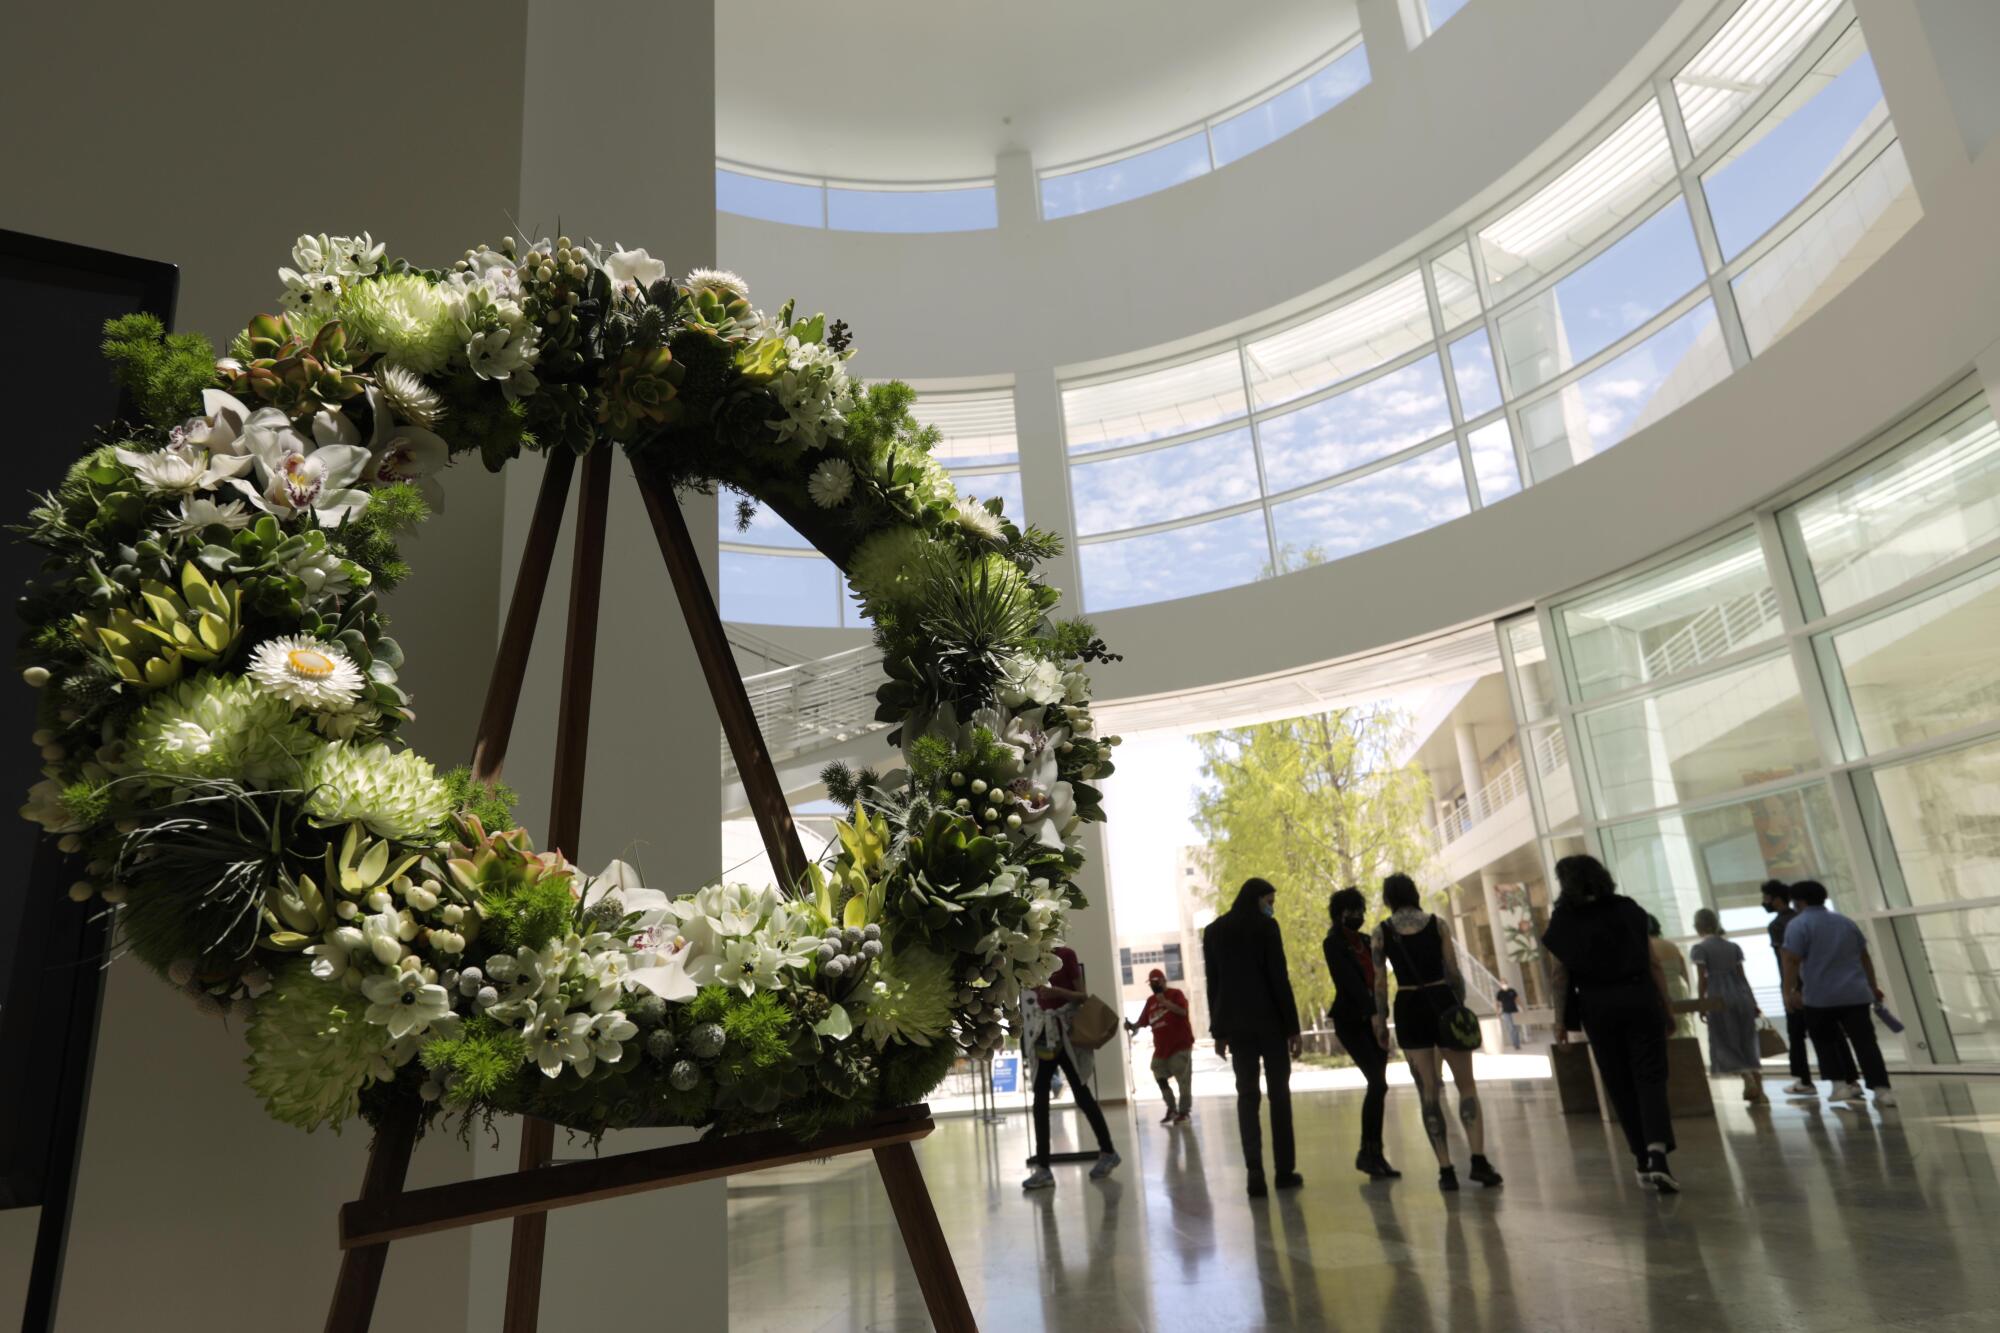 A wreath honoring COVID-19 victims stands in the rotunda as visitors return to the Getty Center